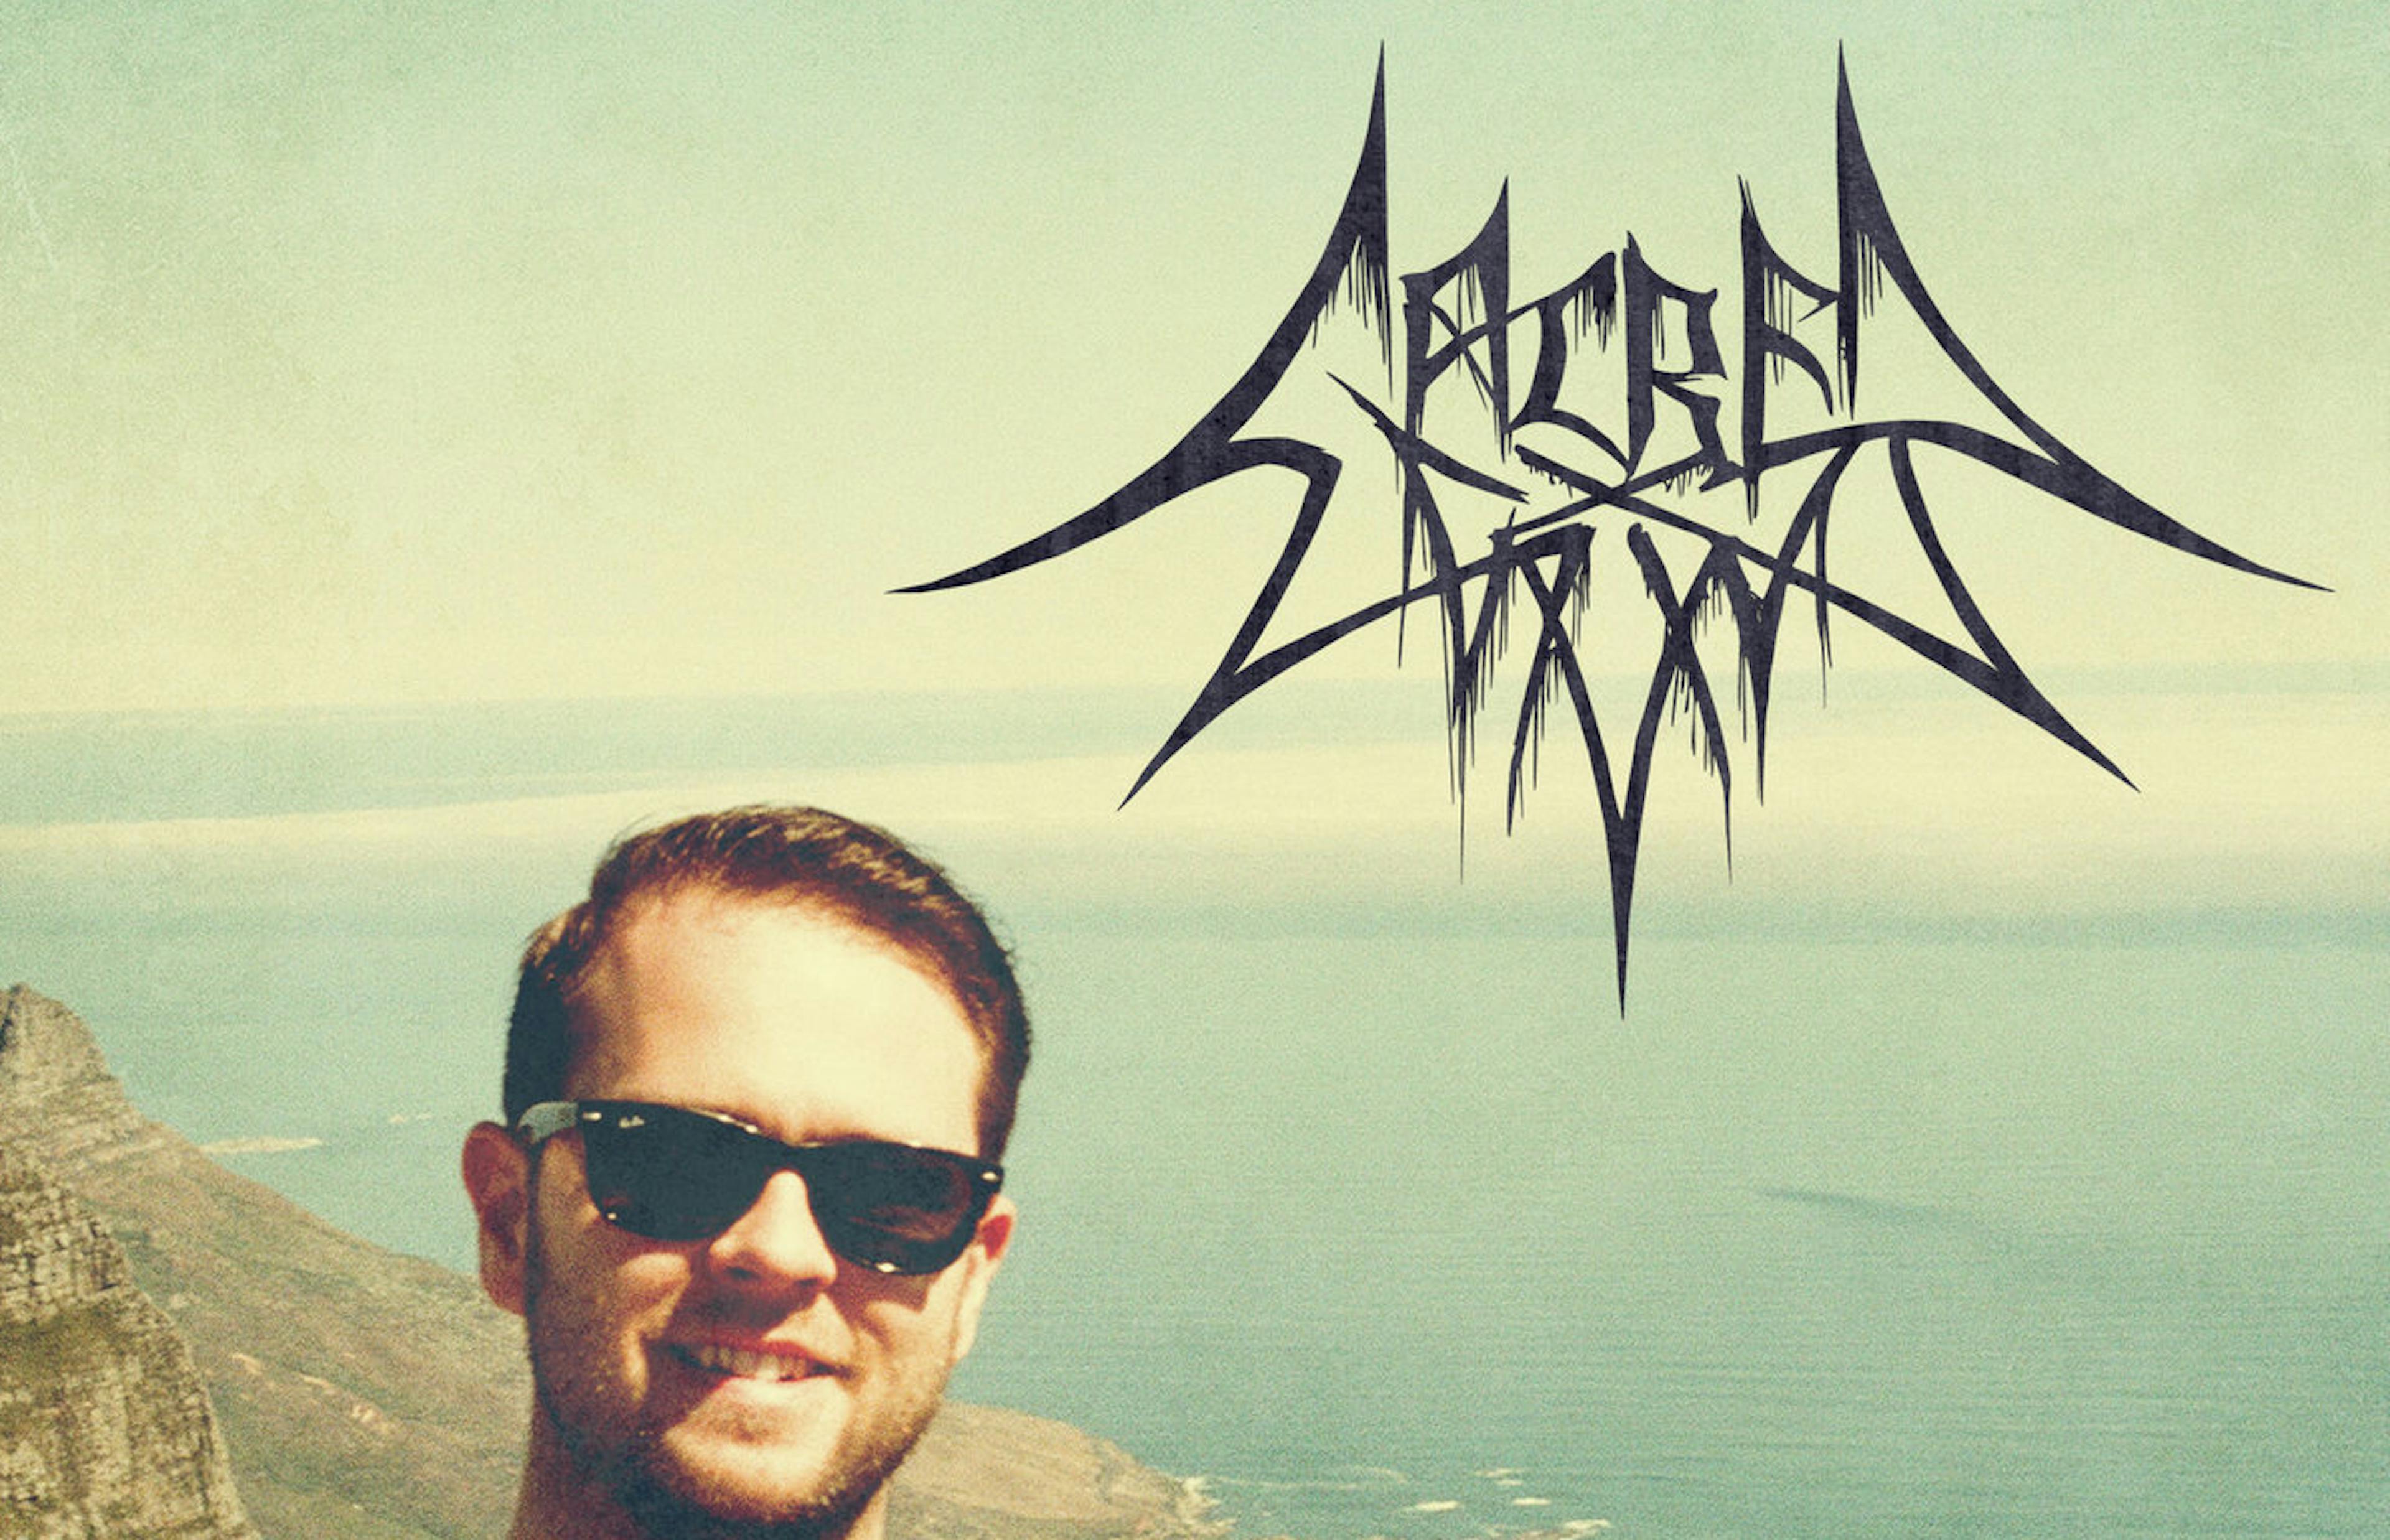 Is This The Most Black Metal Black Metal Album Cover Ever?